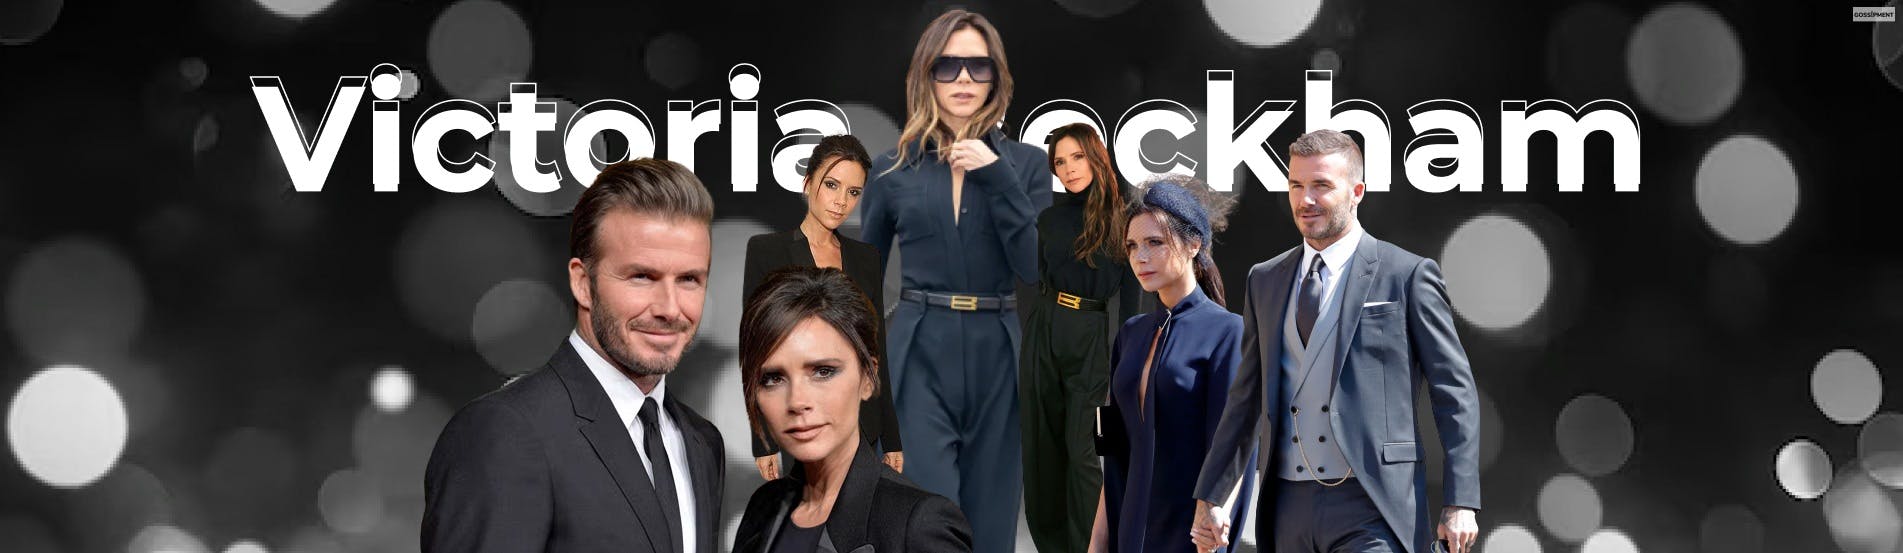 Cover Image for Victoria Beckham Net Worth: What’s Posh Spice’s Bank Account Lookin’ Like?